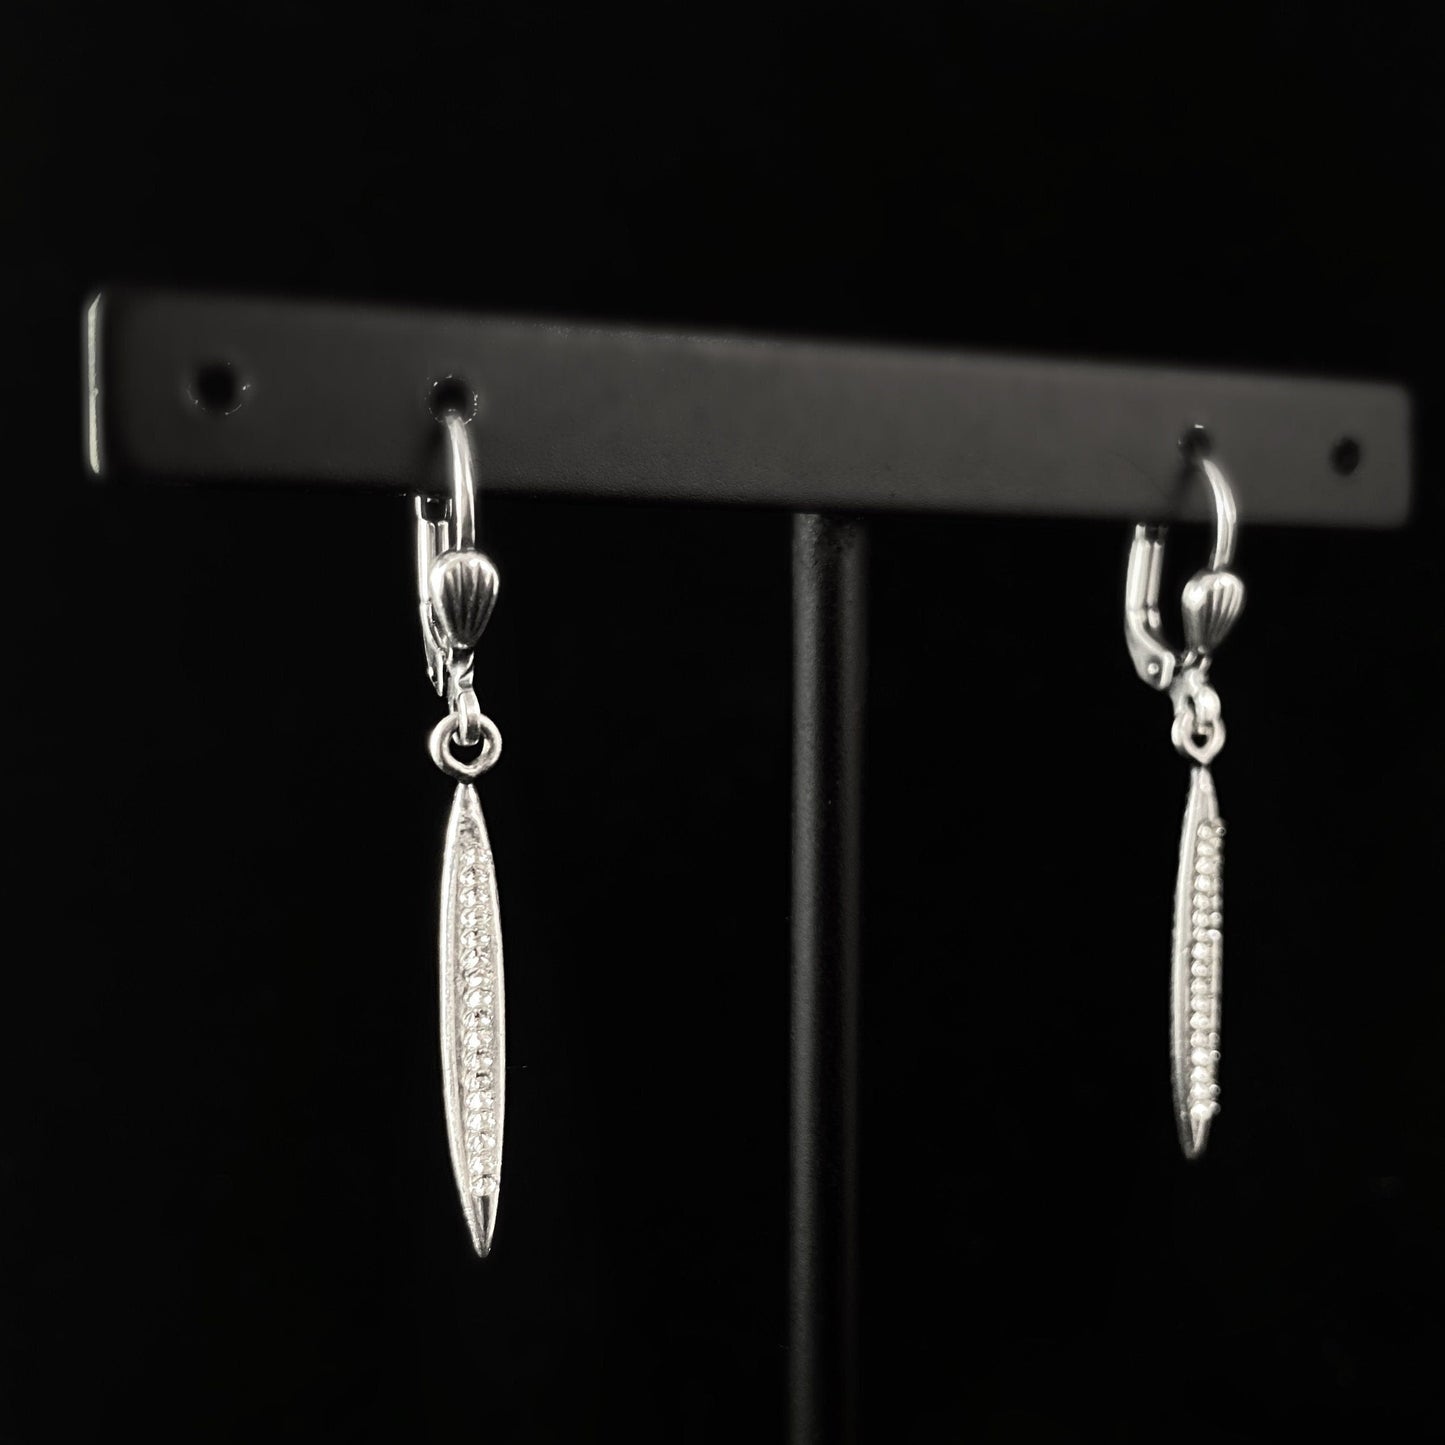 Small Silver Spears with Swarovski Crystals Drop Earrings - La Vie Parisienne by Catherine Popesco